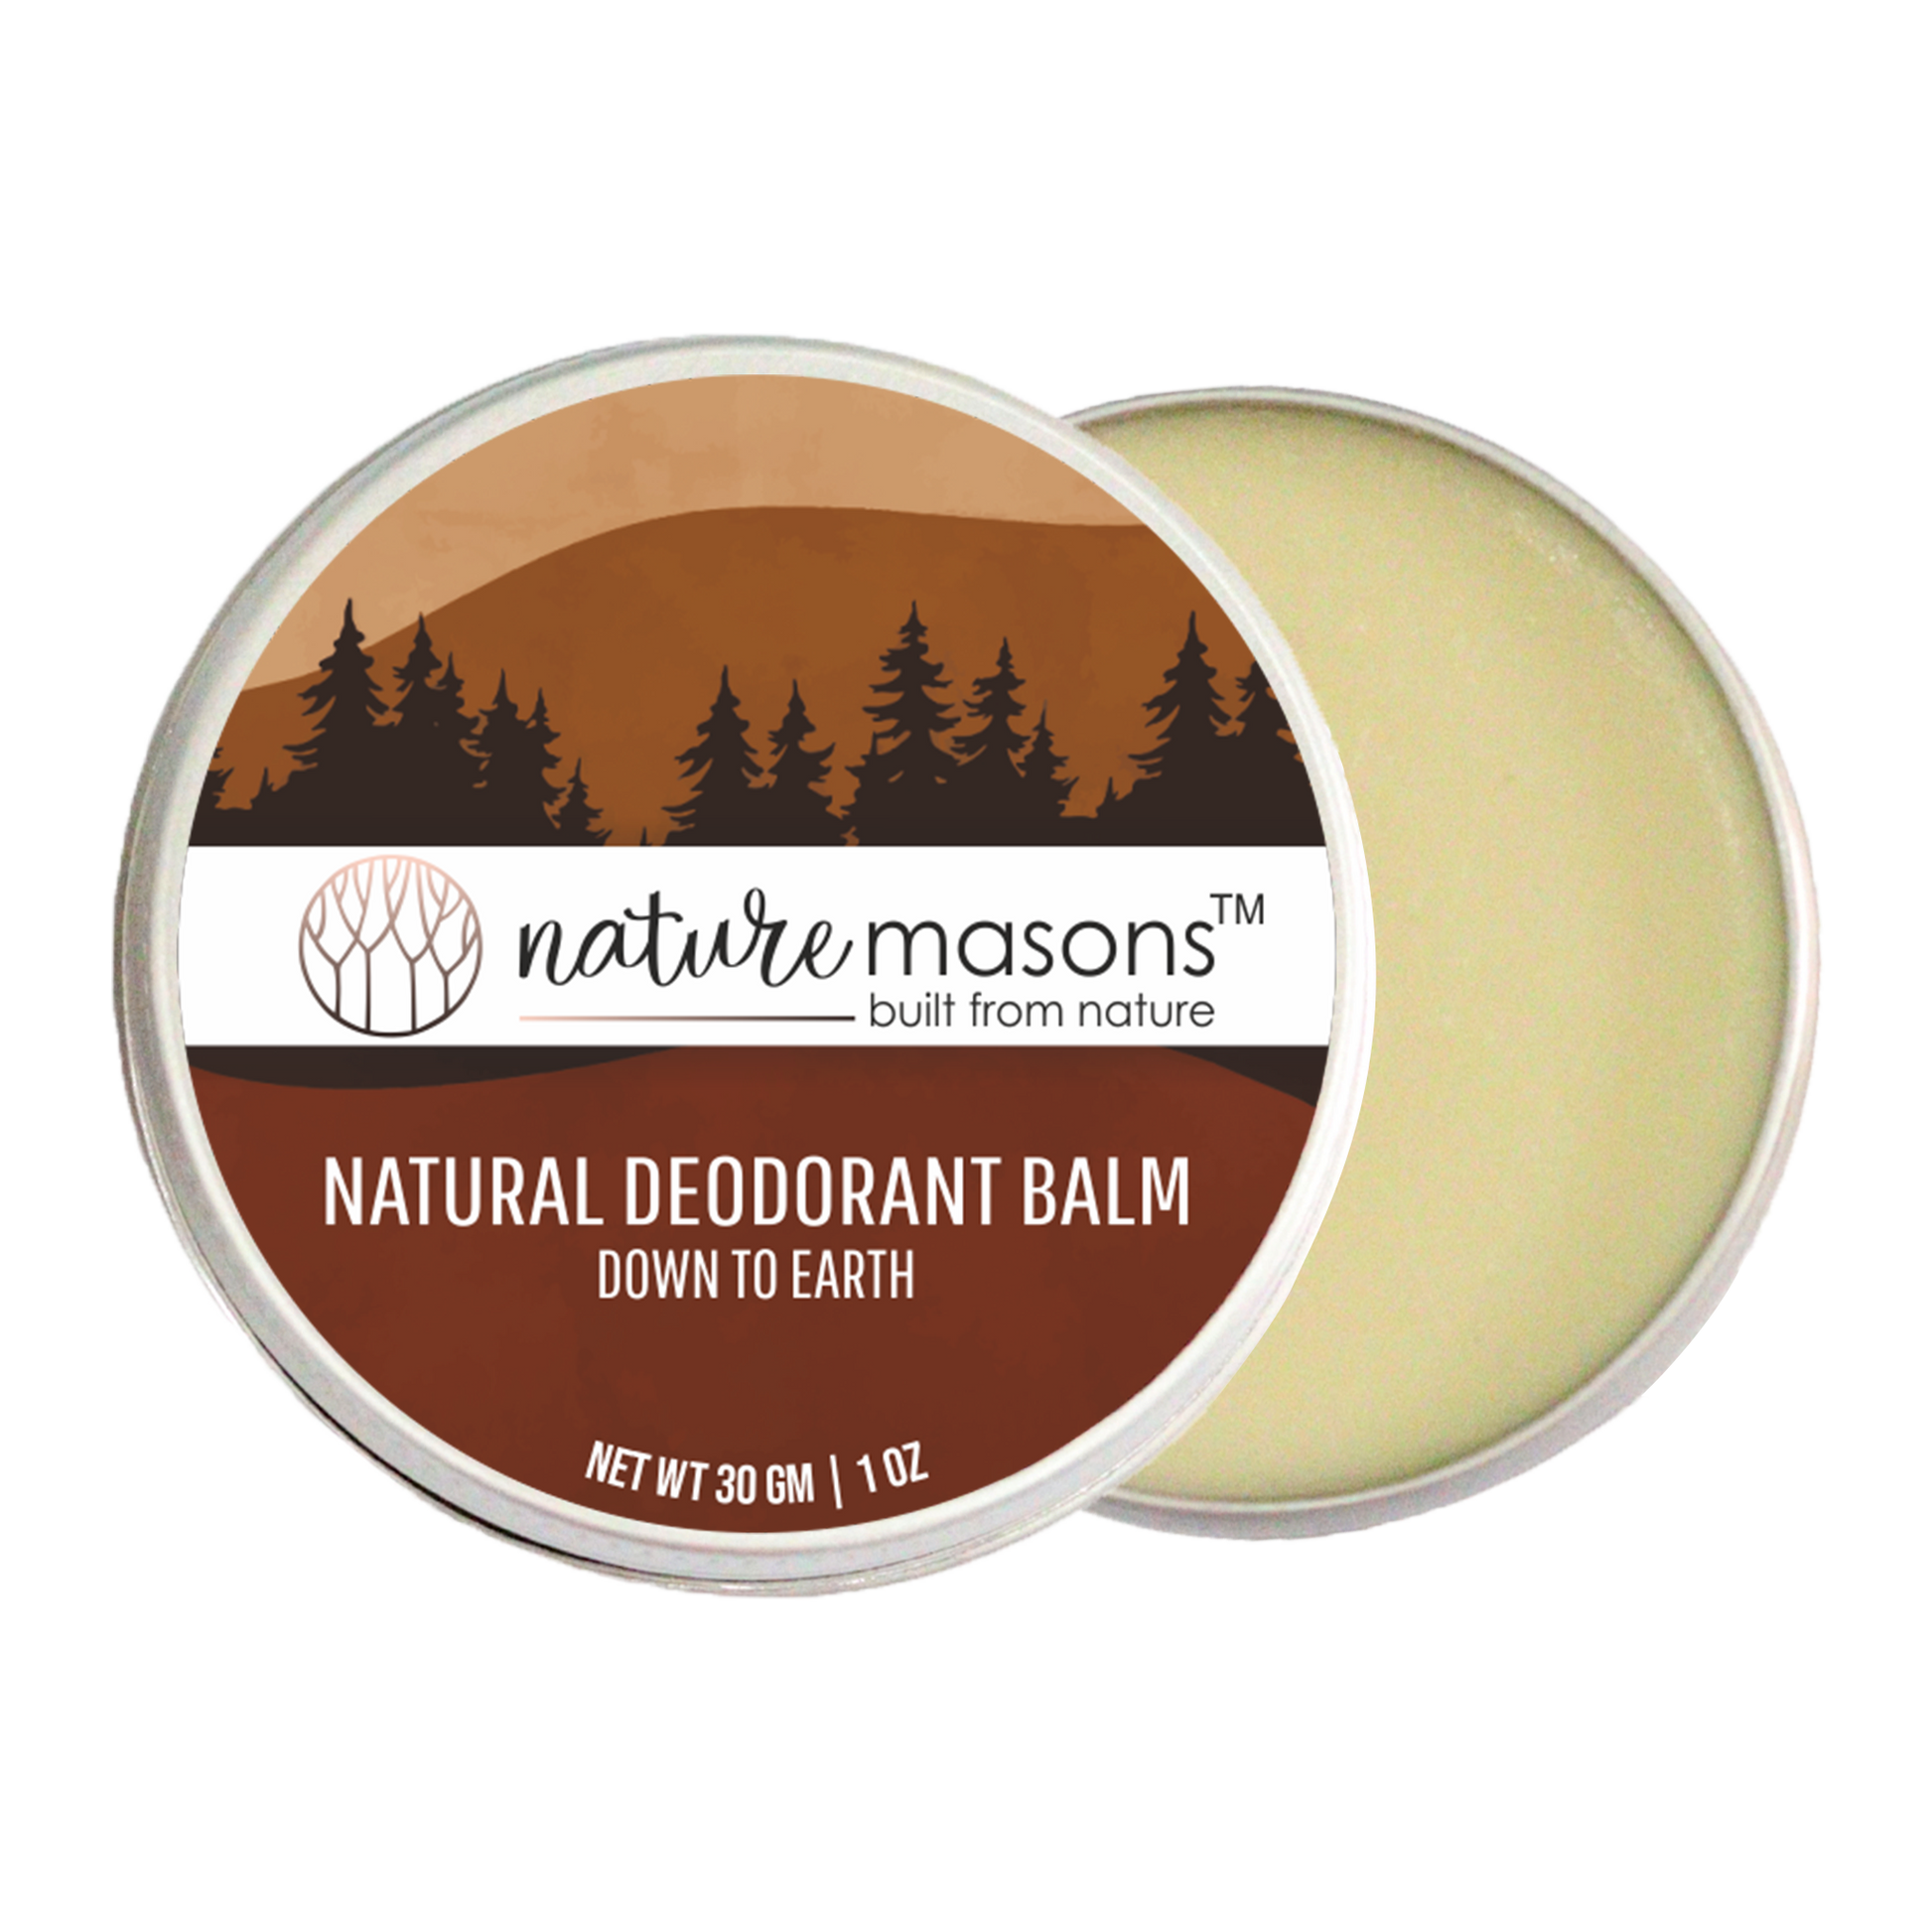 Down to Earth - Natural Deodorant The Nature Masons